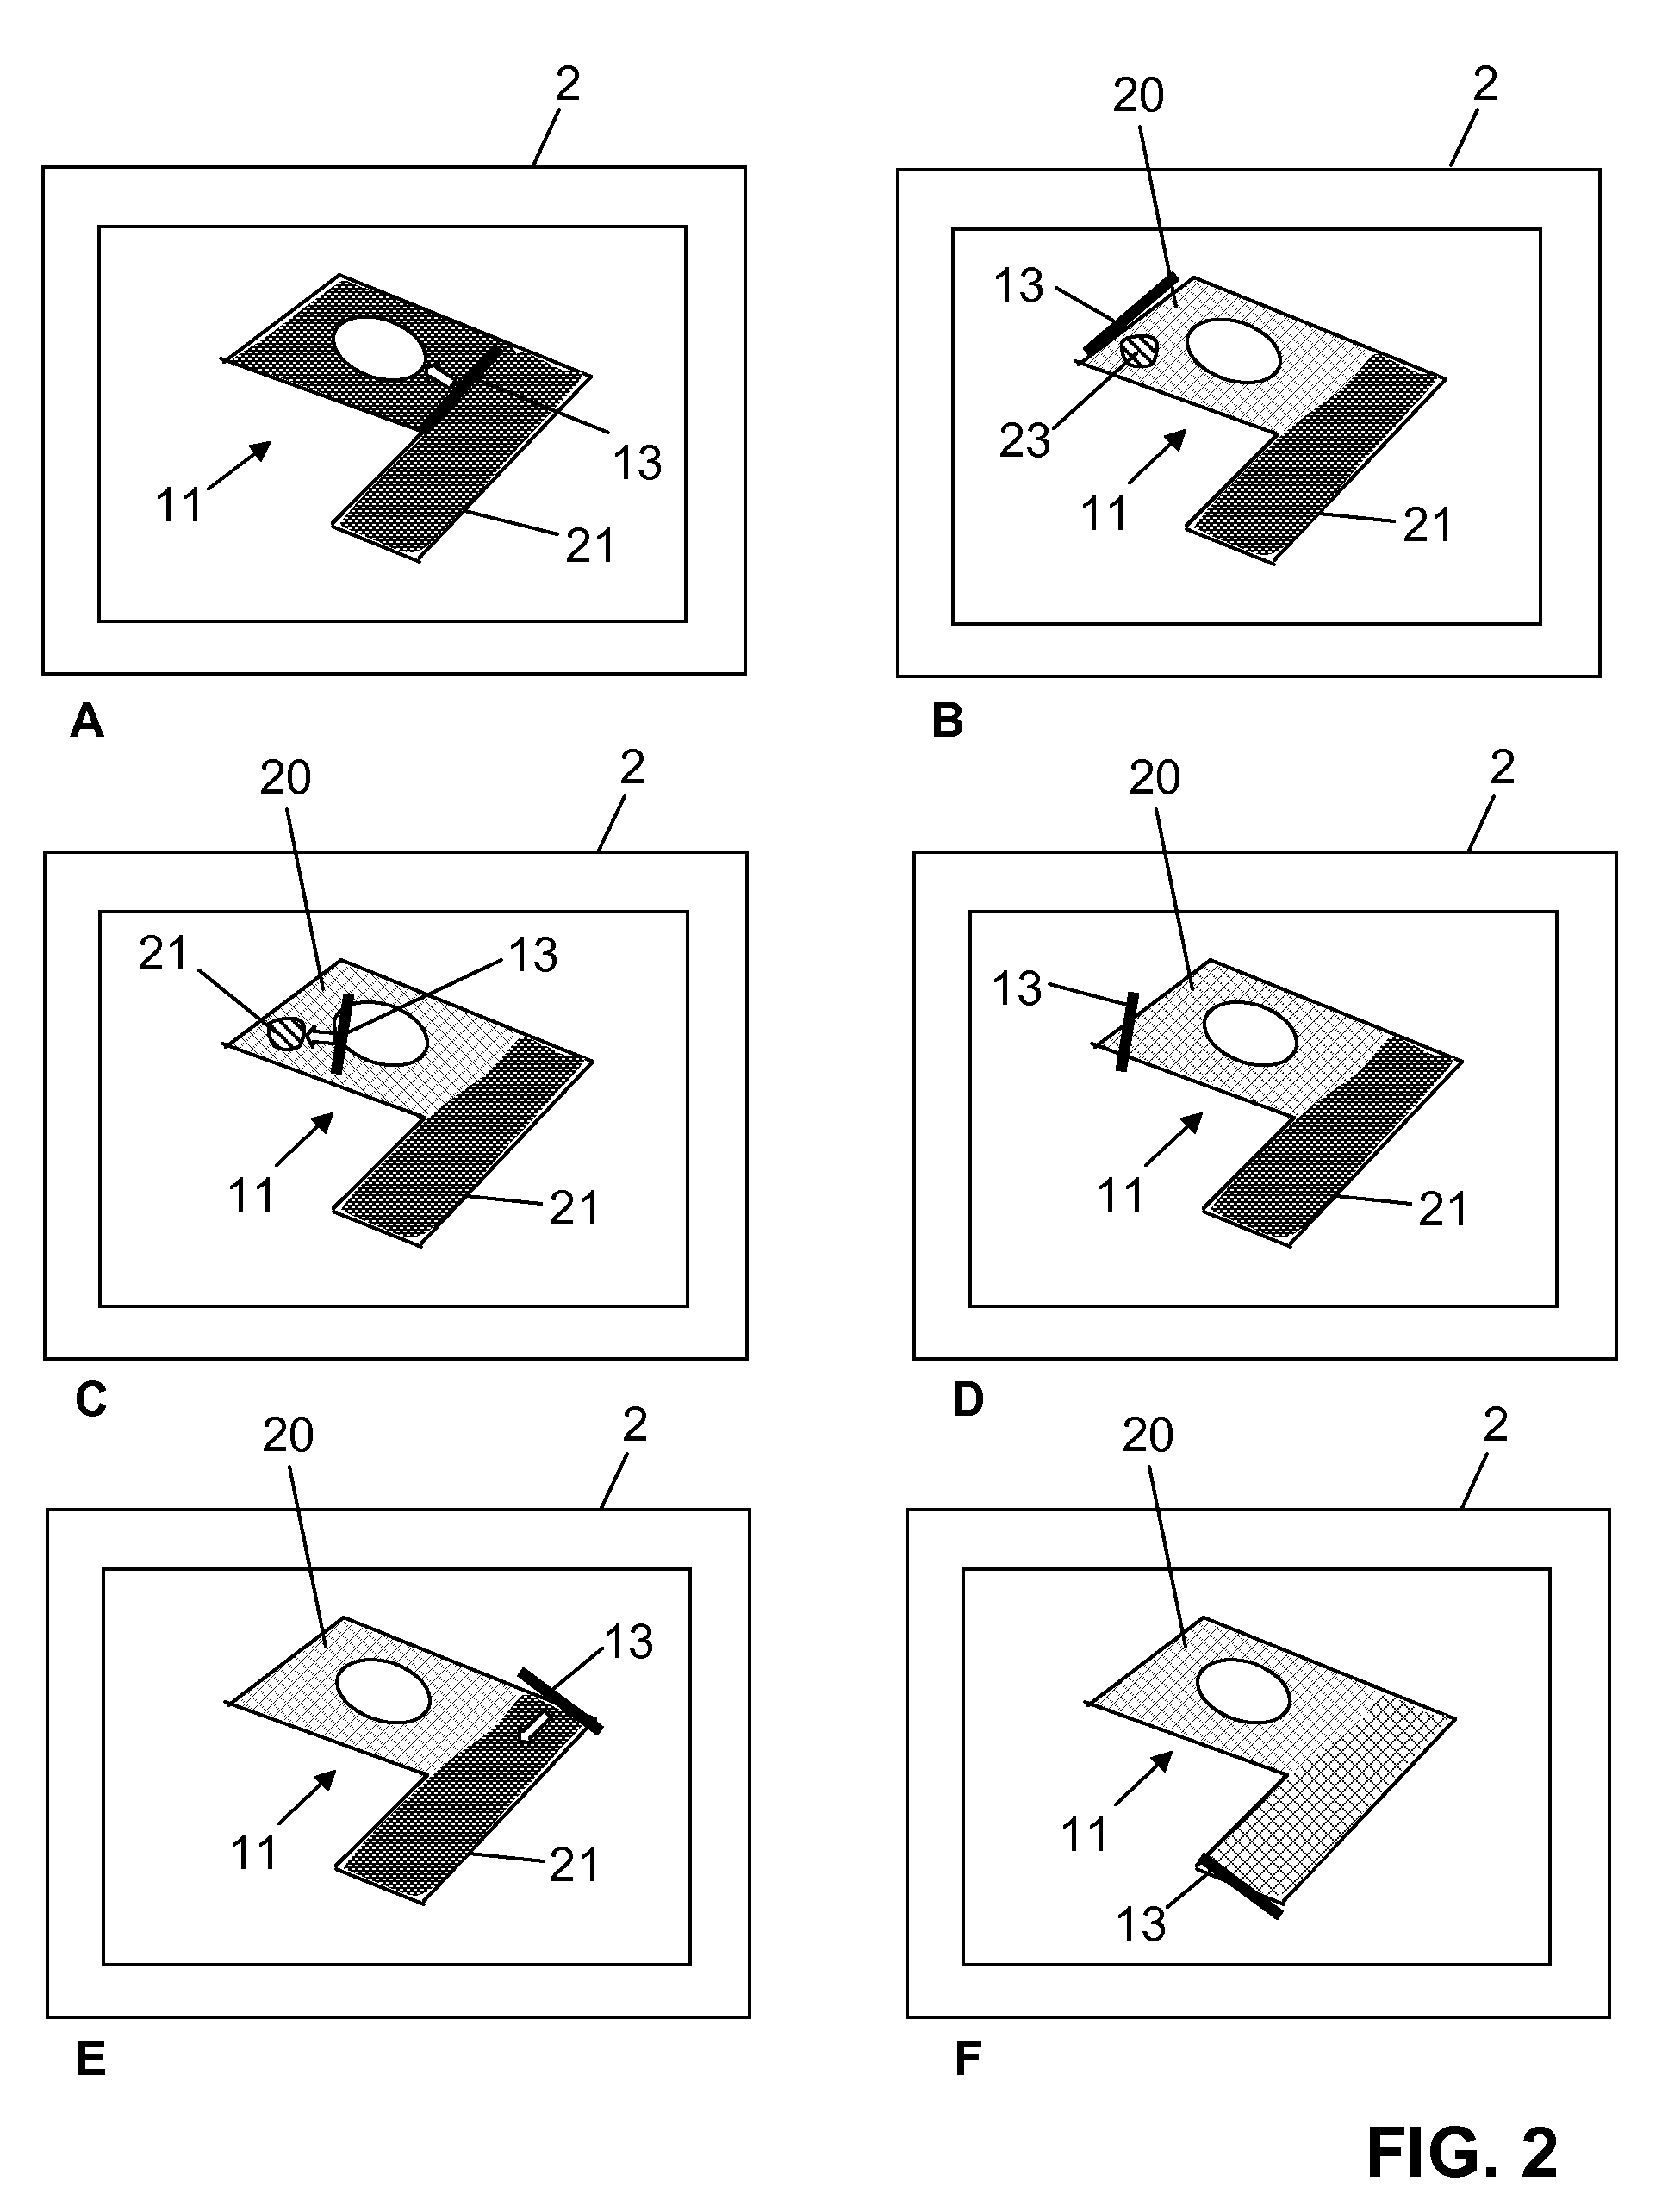 Method and computer program for improving the dimensional acquisition of an object